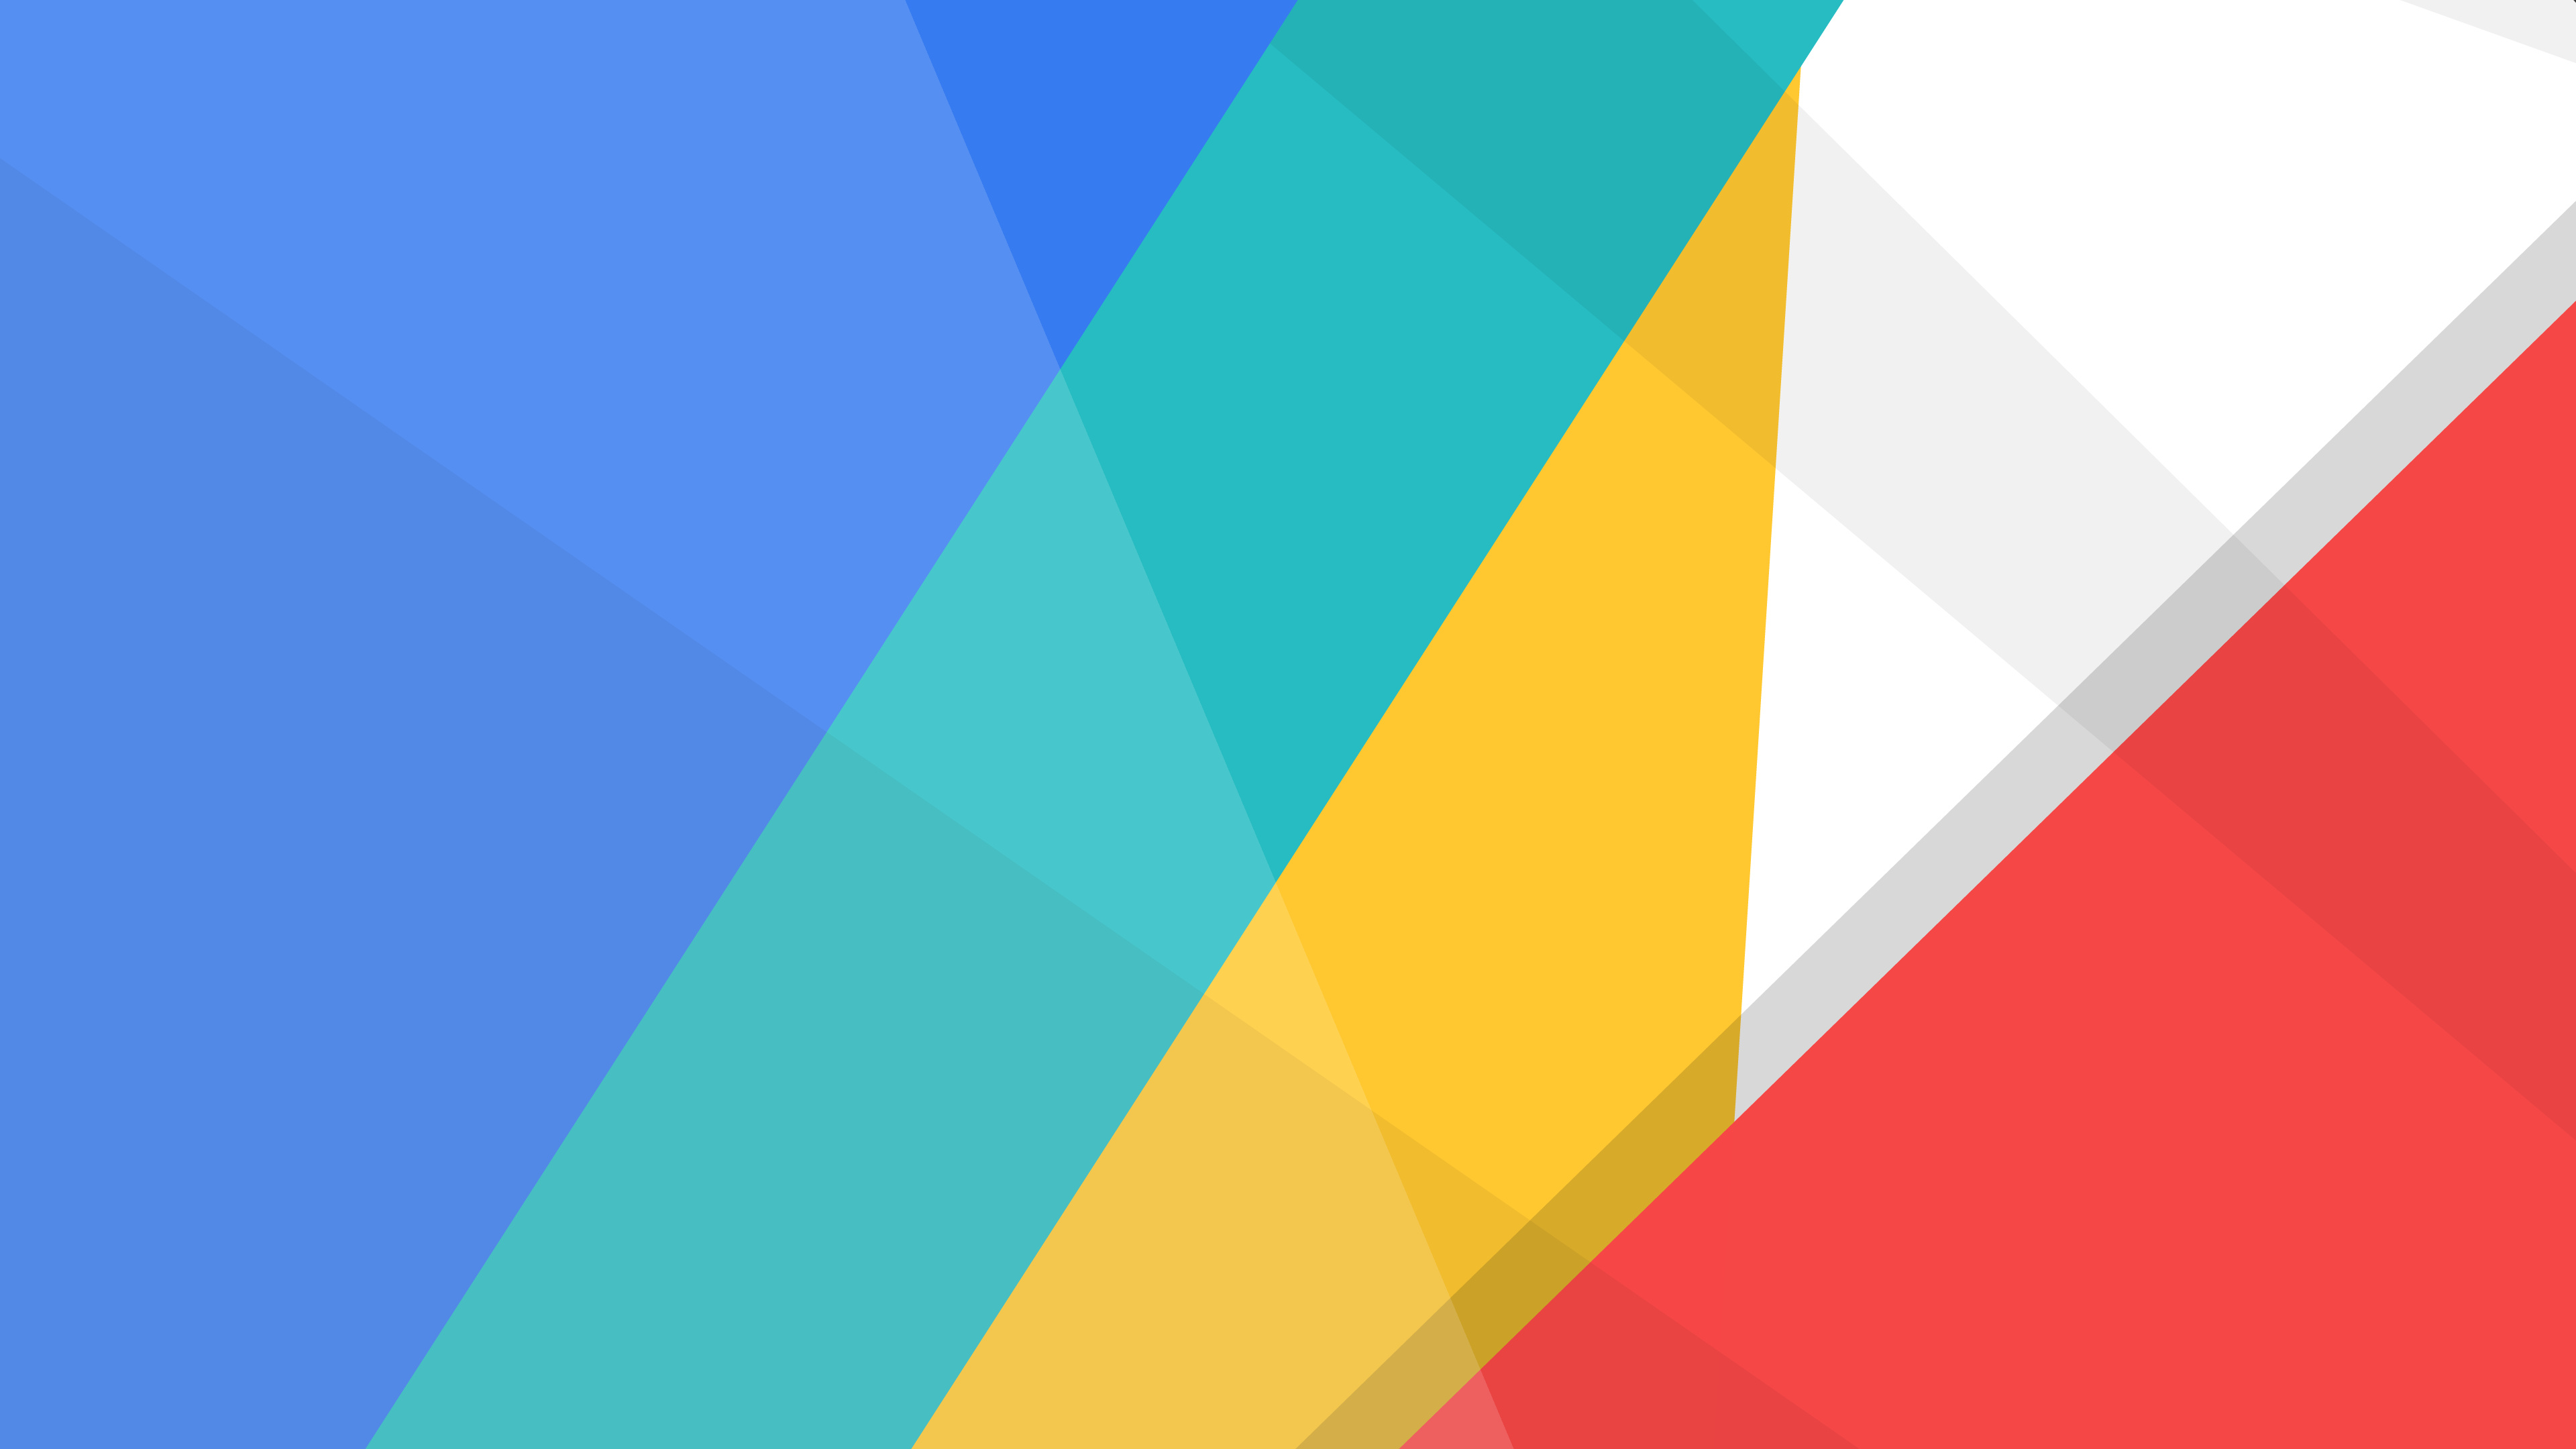 Graphic: Material design, Abstract geometry, Parallels, Sharp angles. 3840x2160 4K Wallpaper.